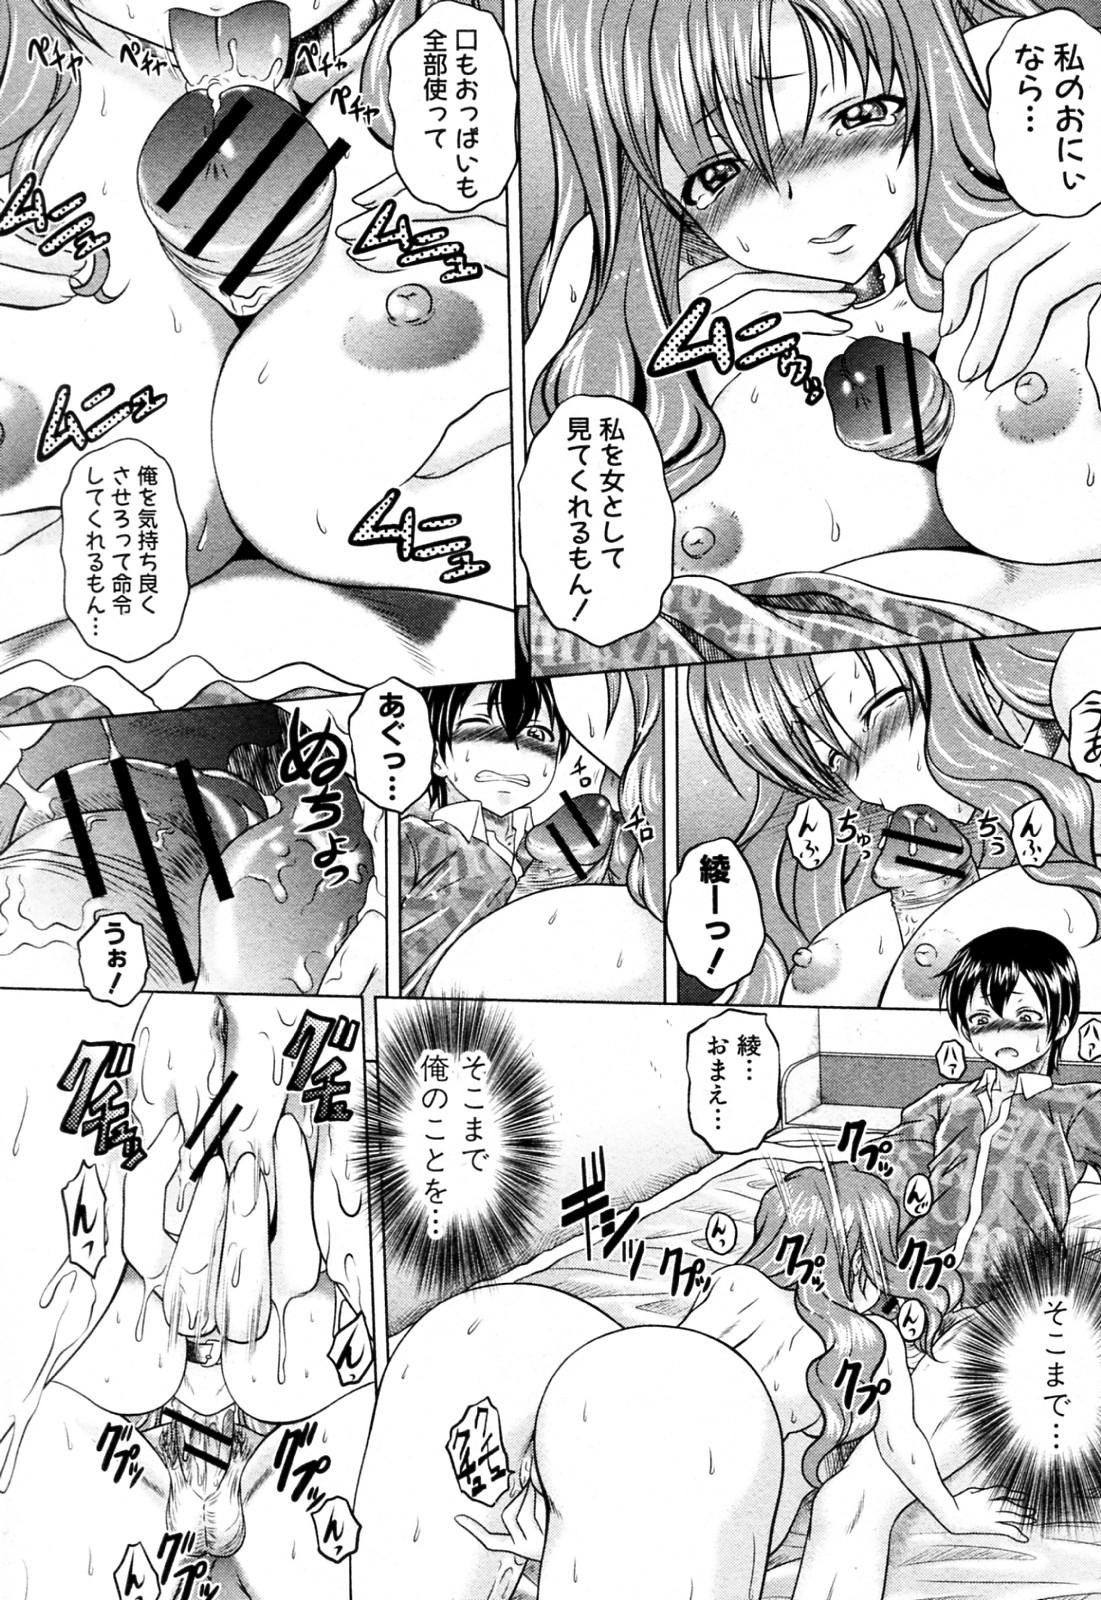 Sesso Imo Con! Doublepenetration - Page 10